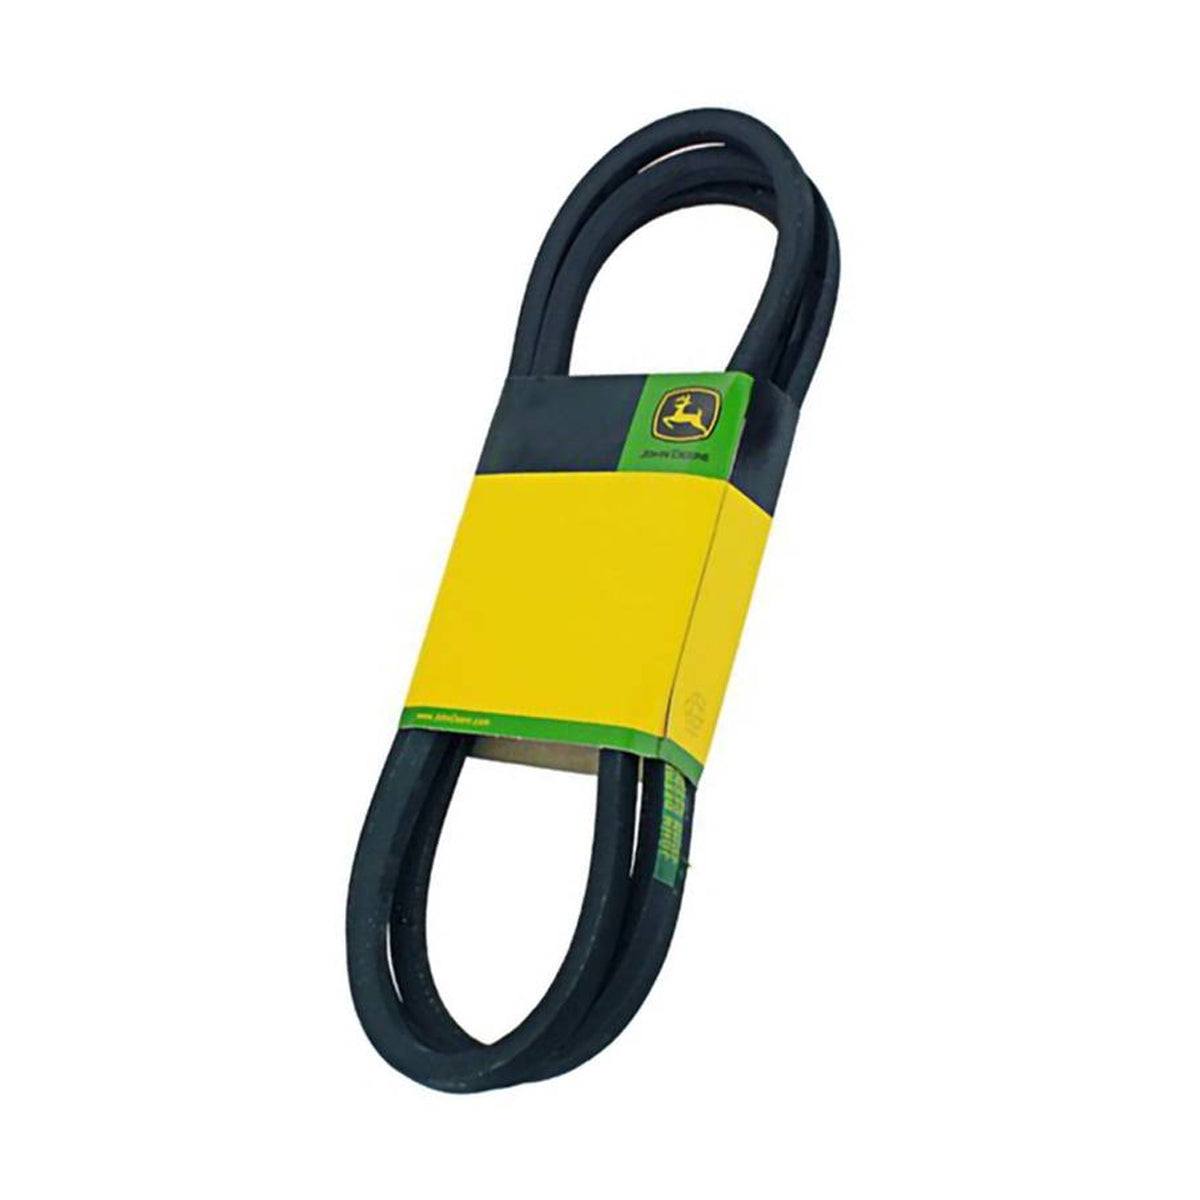 John Deere Traction Drive Belt for LX Series & Powerflow Bagger Belt for X300, X500, X700, Z400, Z500 or Z600 with 48/54" Deck - M147044